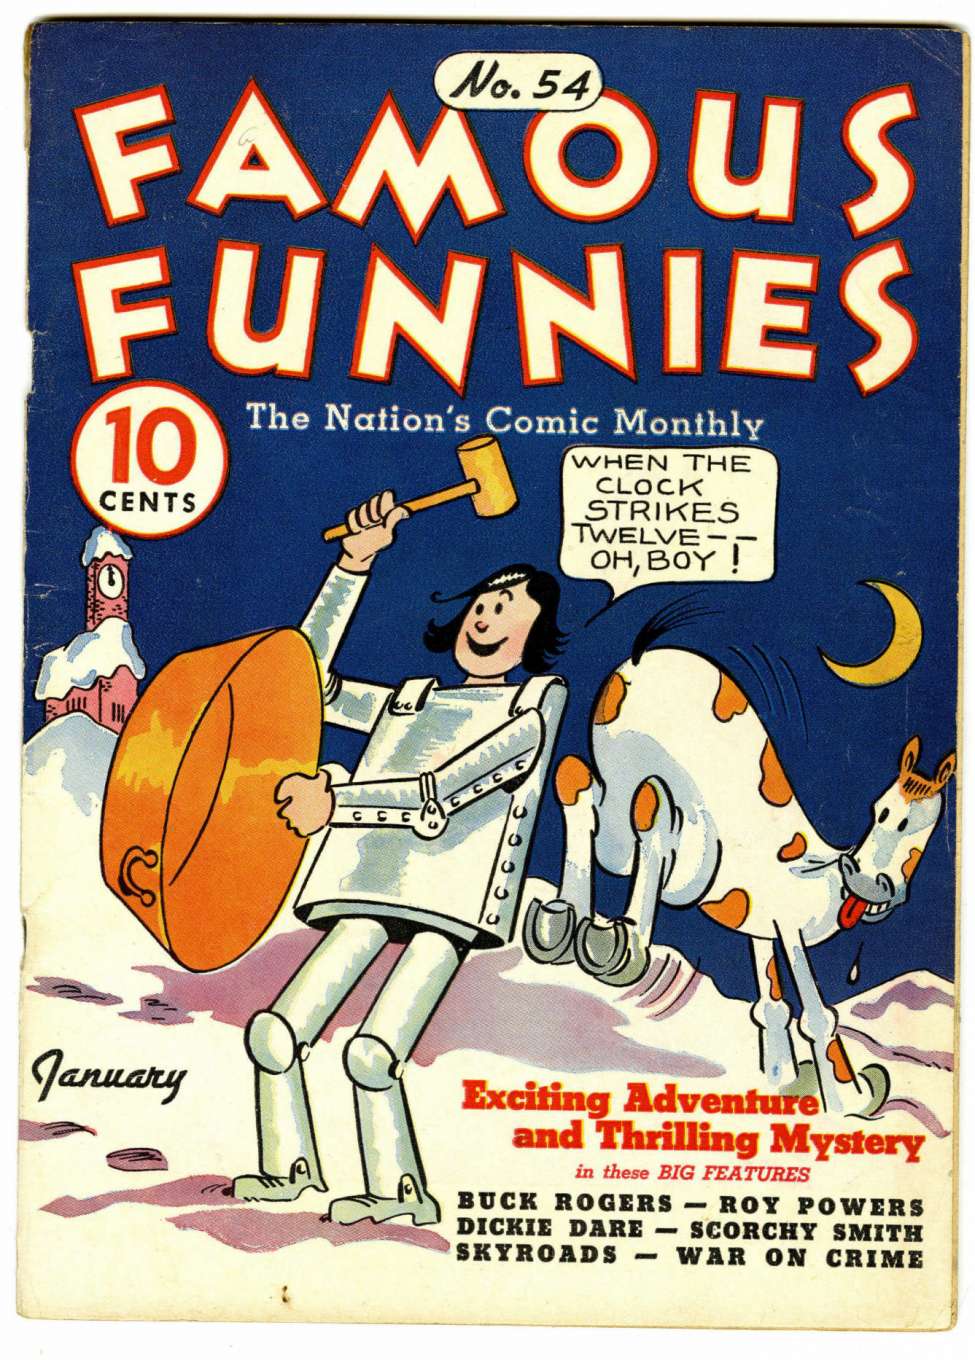 Book Cover For Famous Funnies 54